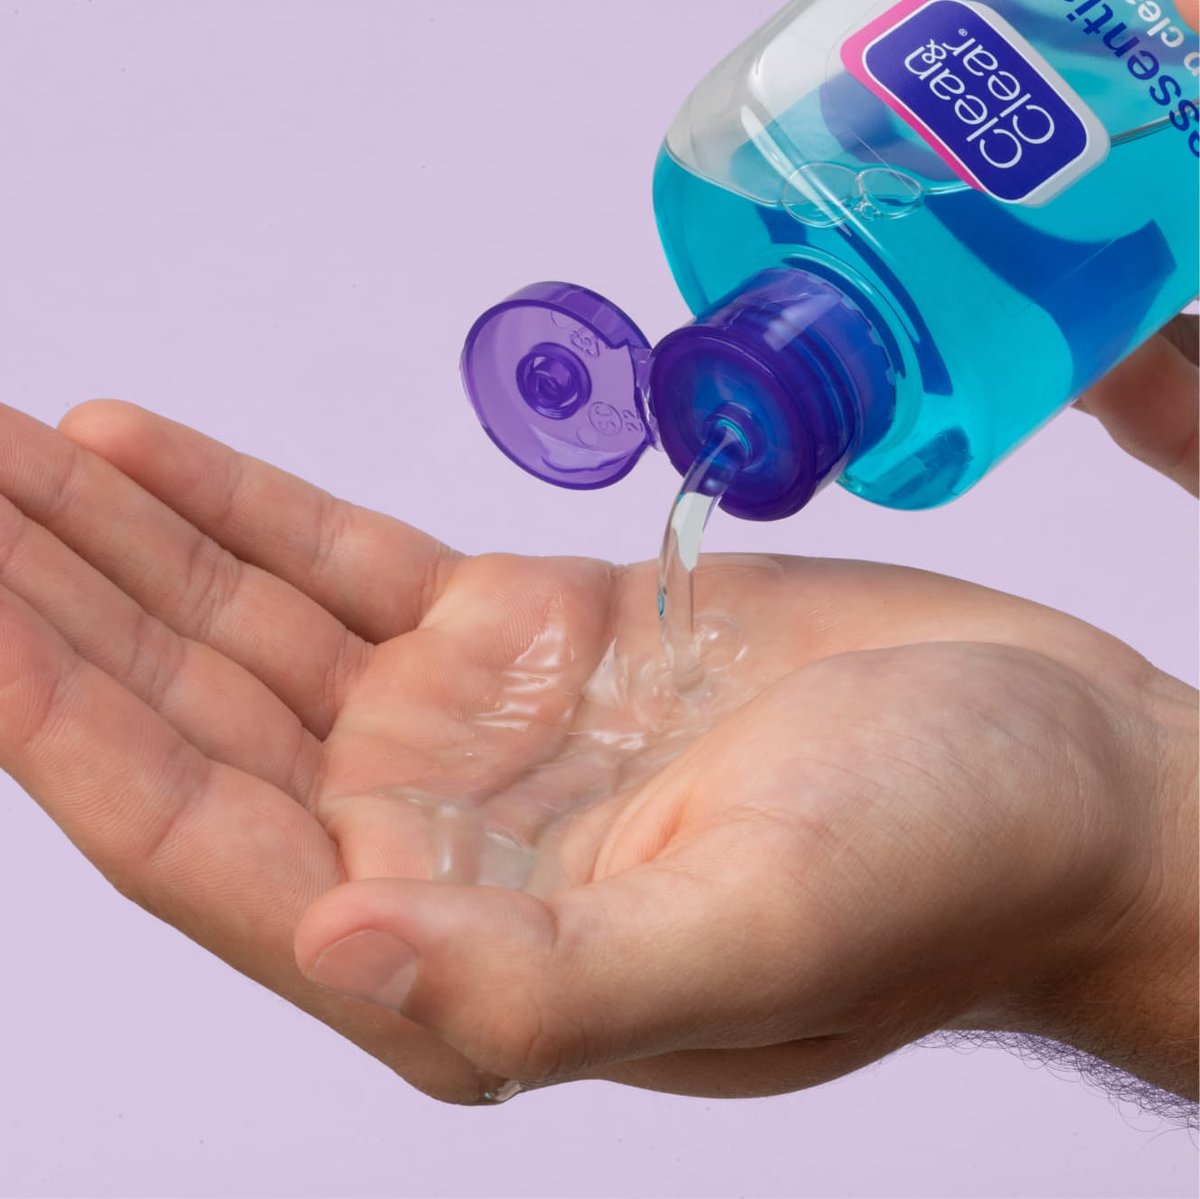 Clear deep cleaning toner for sensitive skin poured into hand from blue and purple Clean & Clear bottle in front of light purple background